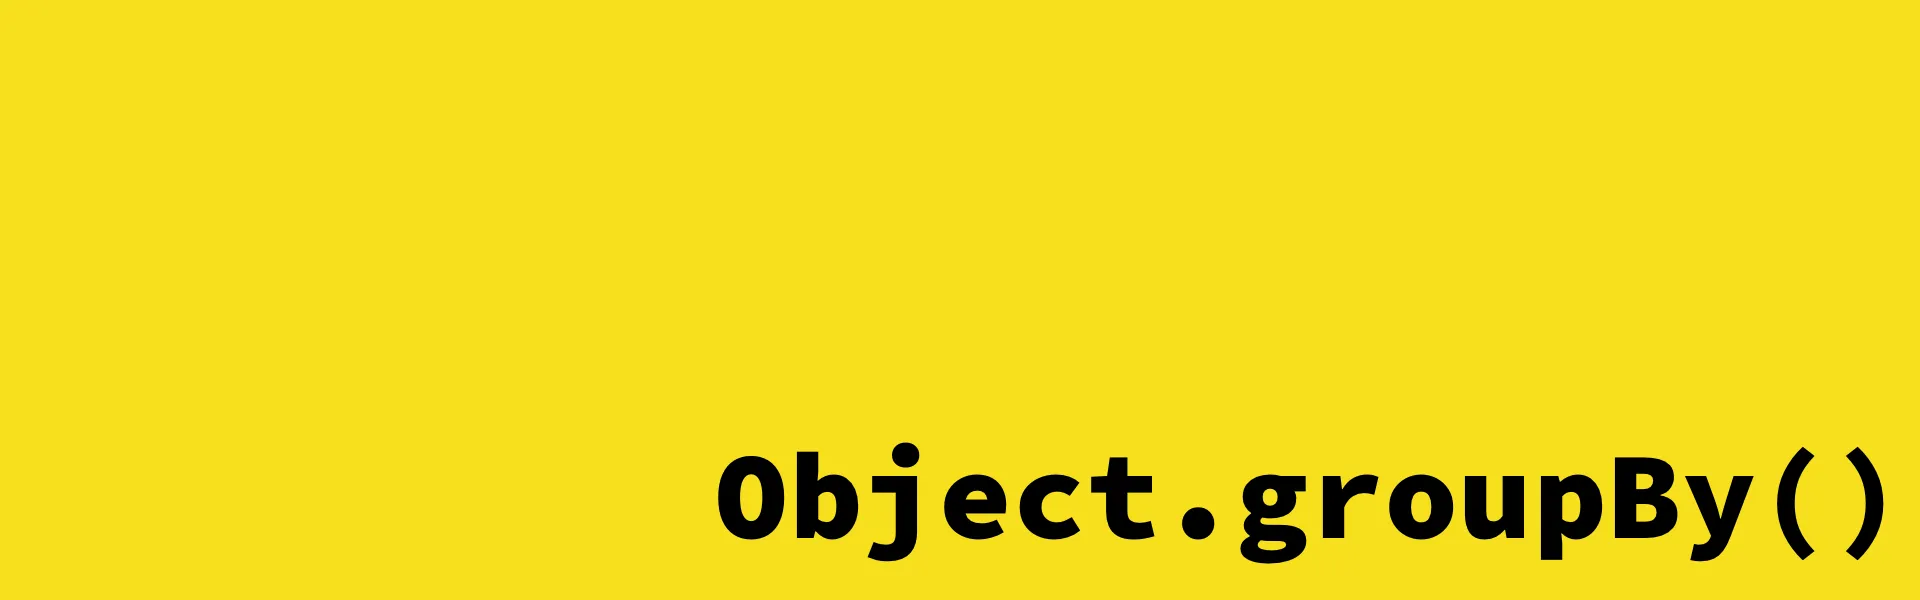 The function Object.groupBy on a JavaScript yellow background